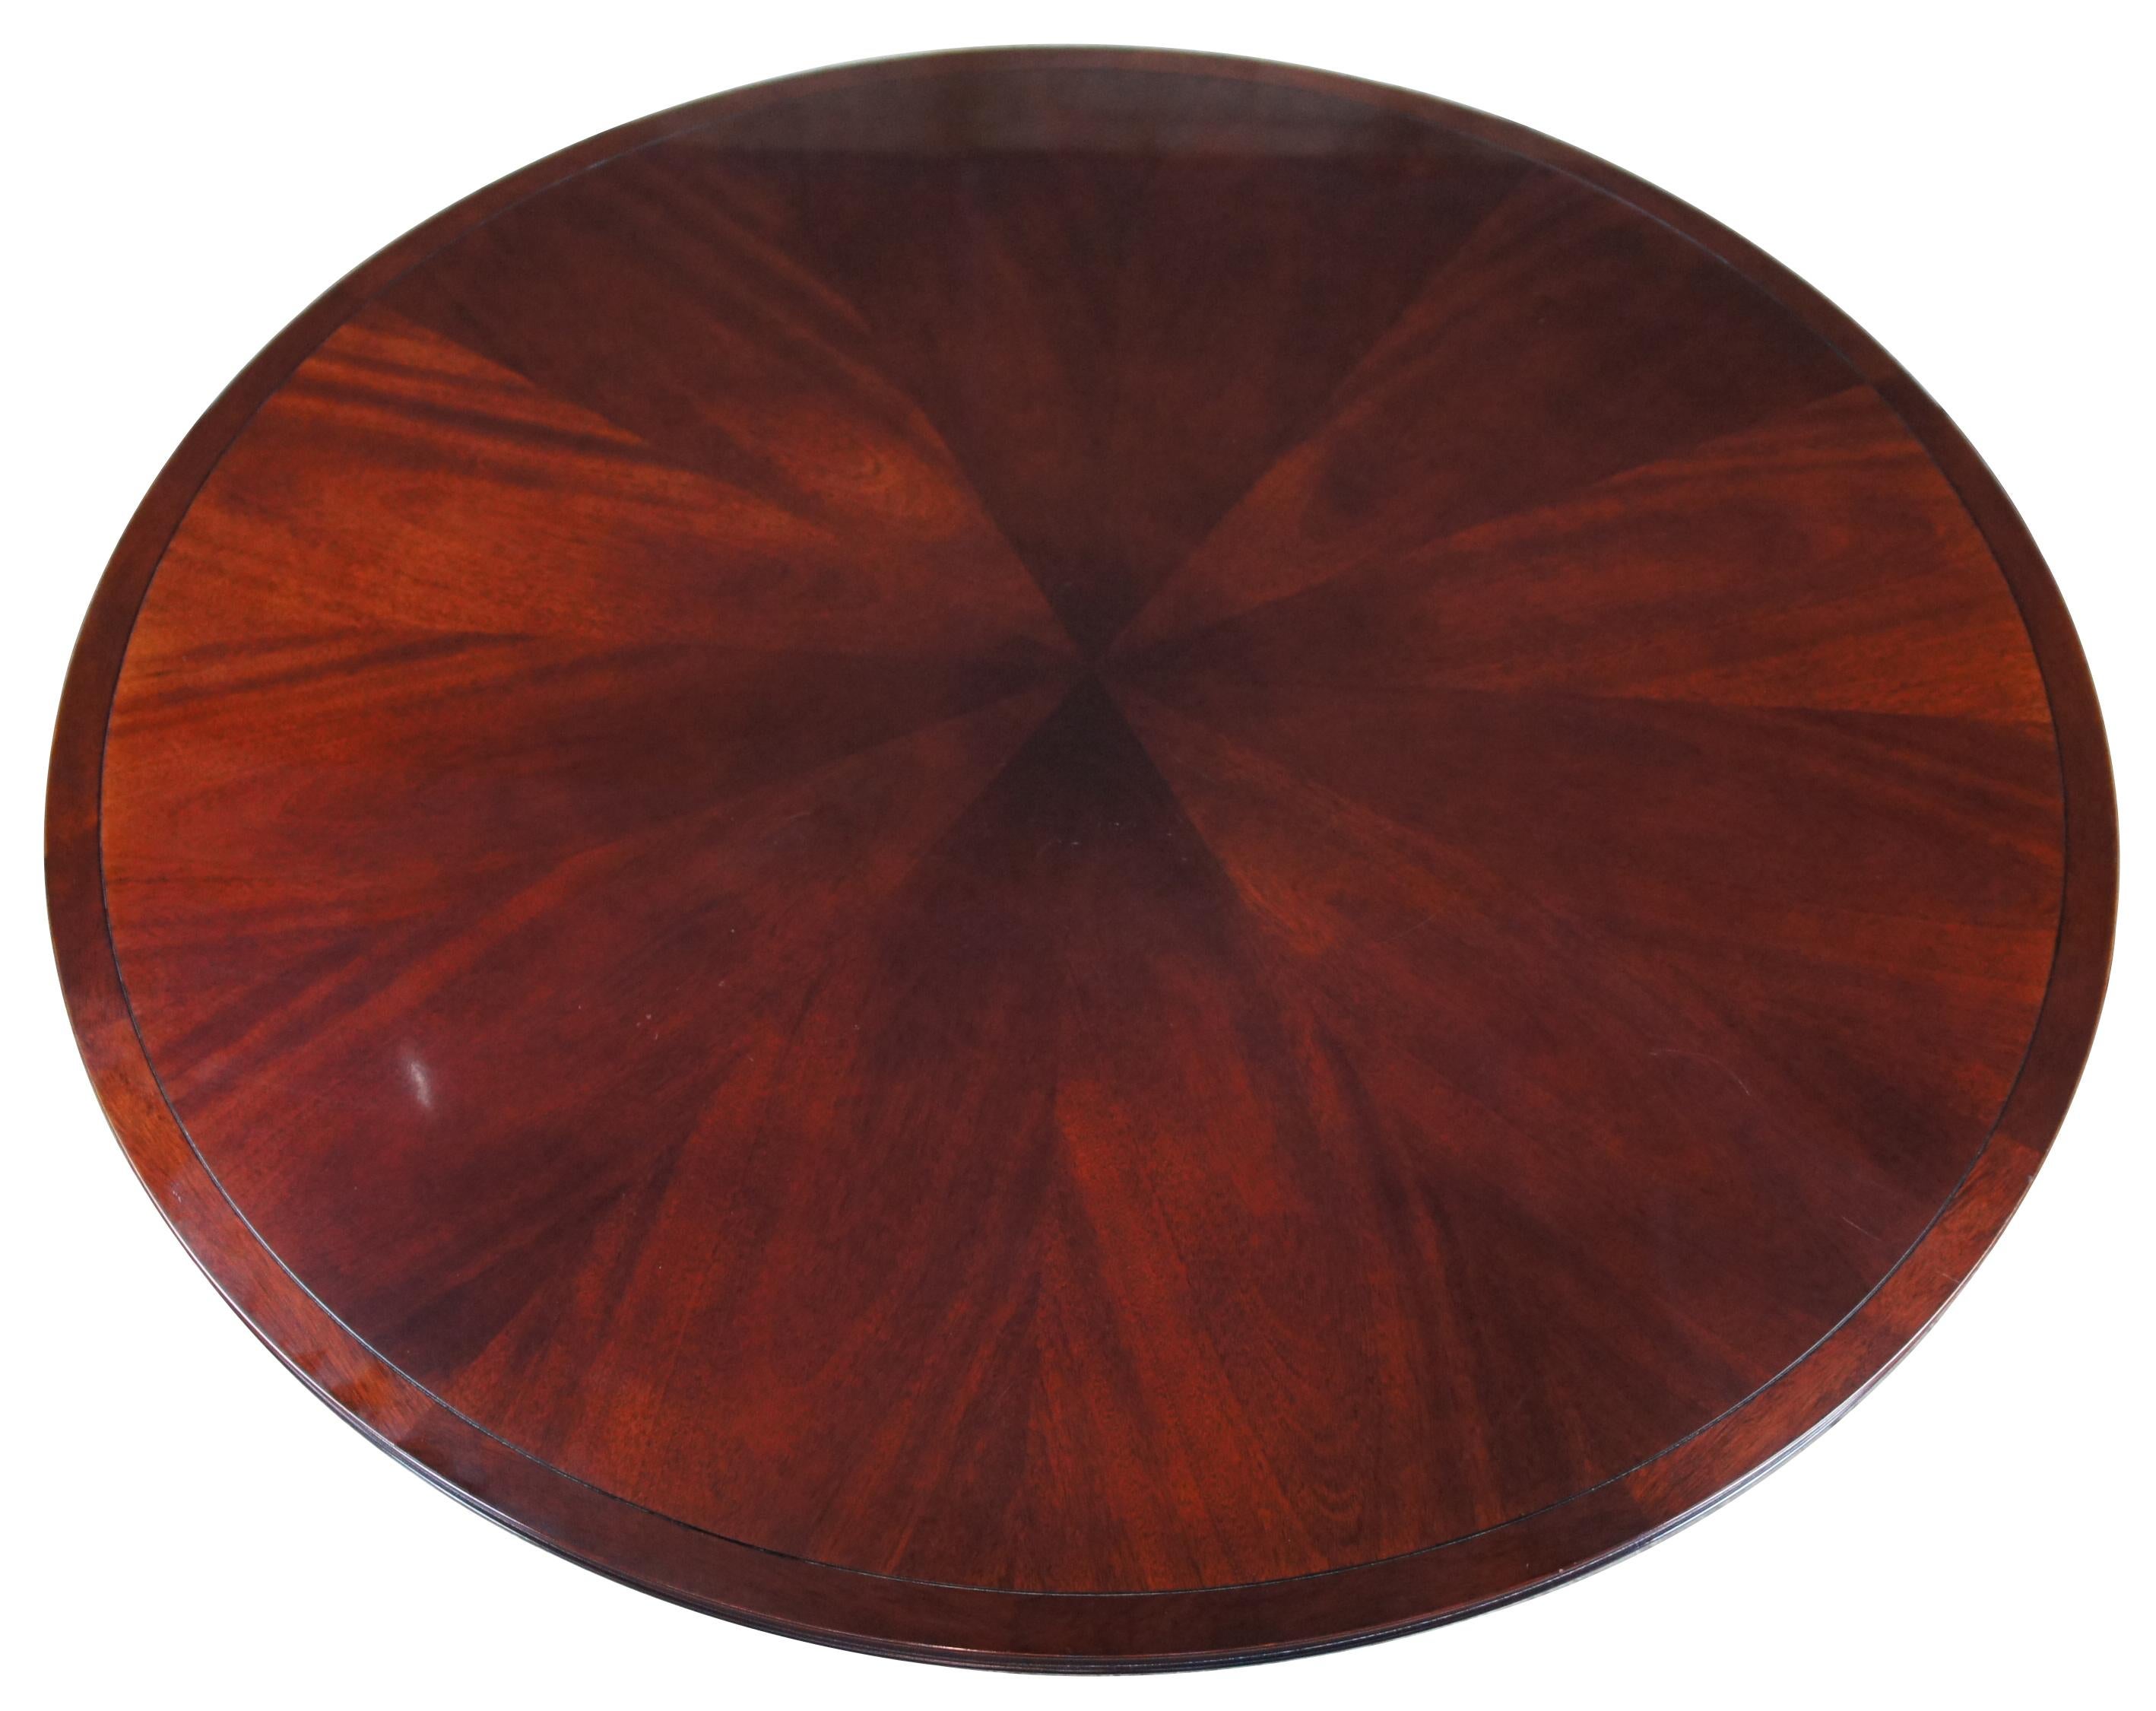 Designed by Barbara Barry for Baker, this pedestal table has a 60 inch round top with concave rim. Six curving legs are connected by a circular stretcher. The luxurious mahogany wood is covered in a rich, dark finish. Measure: 60